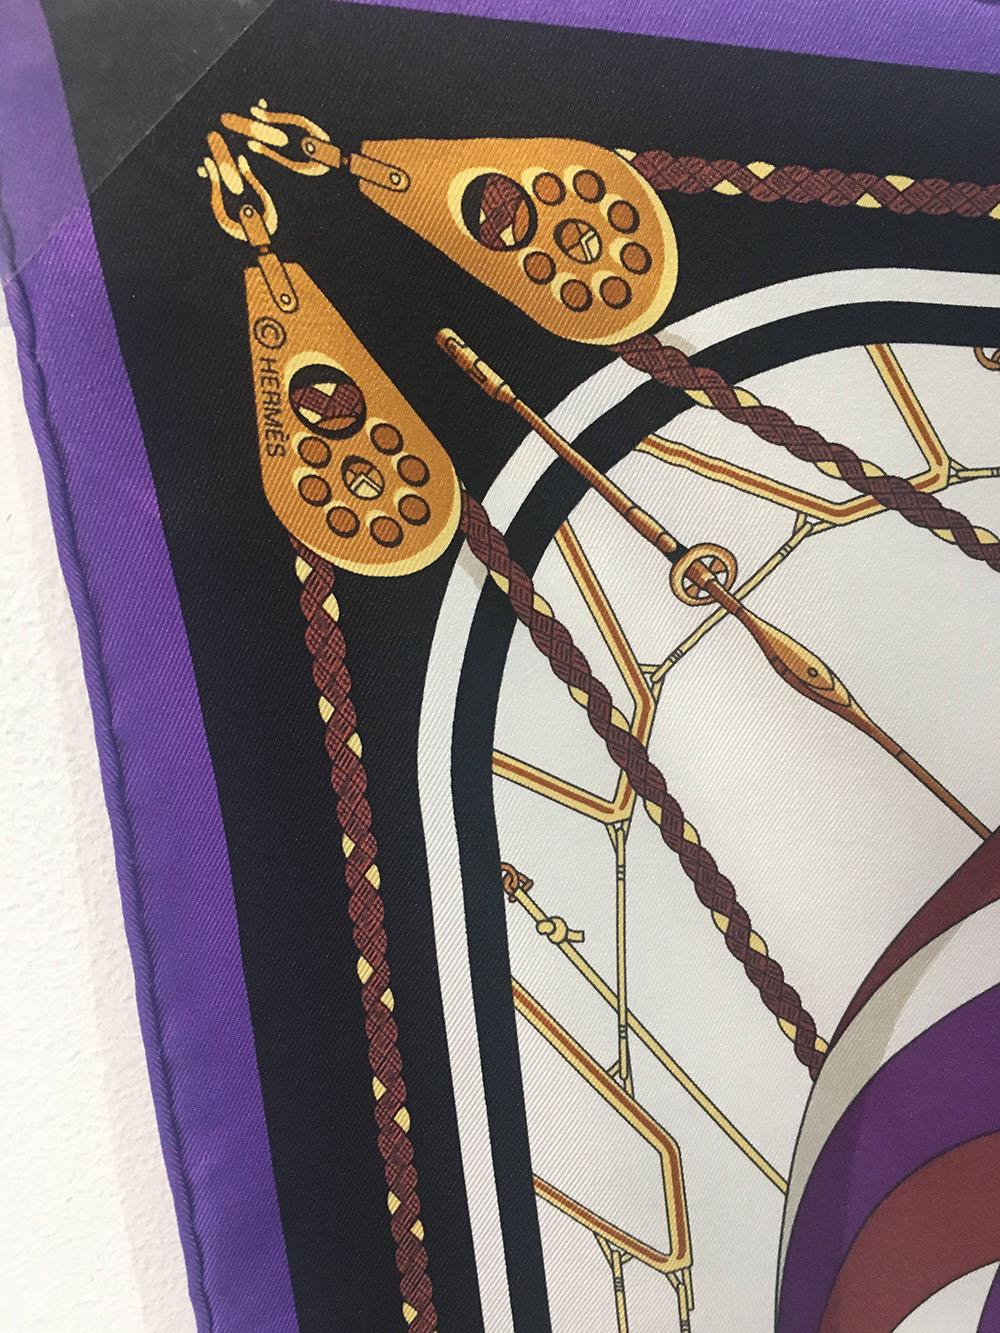 AMAZING Hermes Vintage Spinnaker Silk Scarf in excellent condition. Original silk screen design c1982 by Julia Abadie features a nautical theme with centered racing sailboats on the water surrounded by various spinnaker sails in purple and golds all